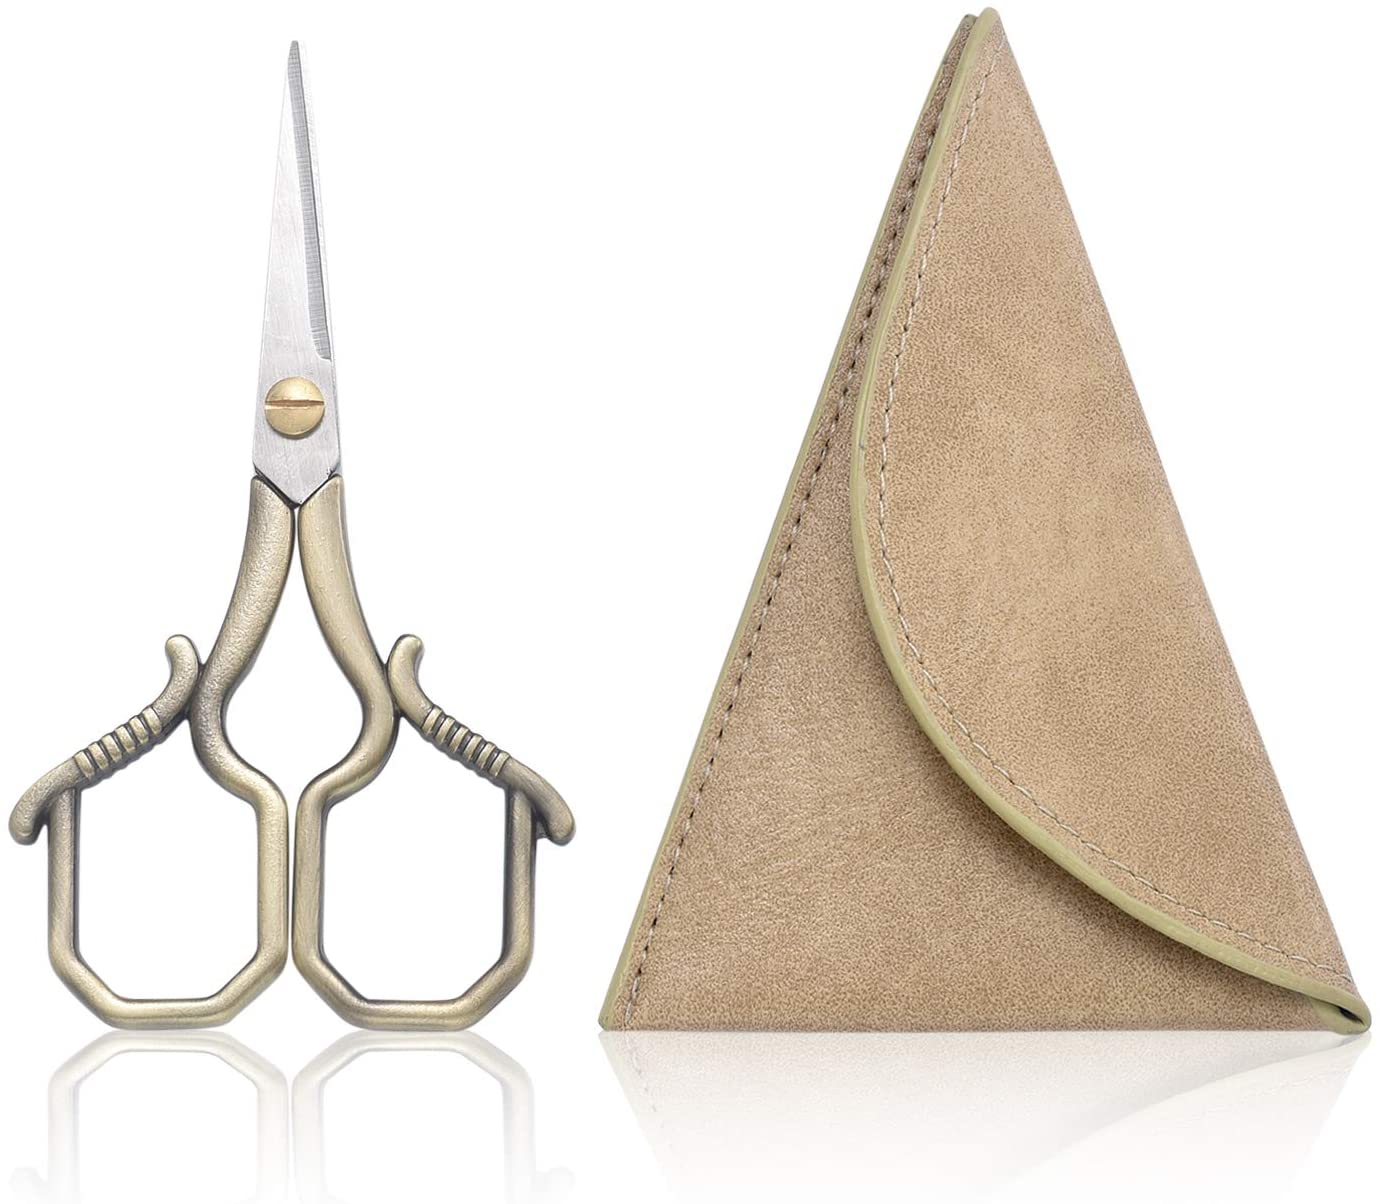 YOUGUOM Embroidery Scissors, Small Sharp Pointed Sewing Scissors